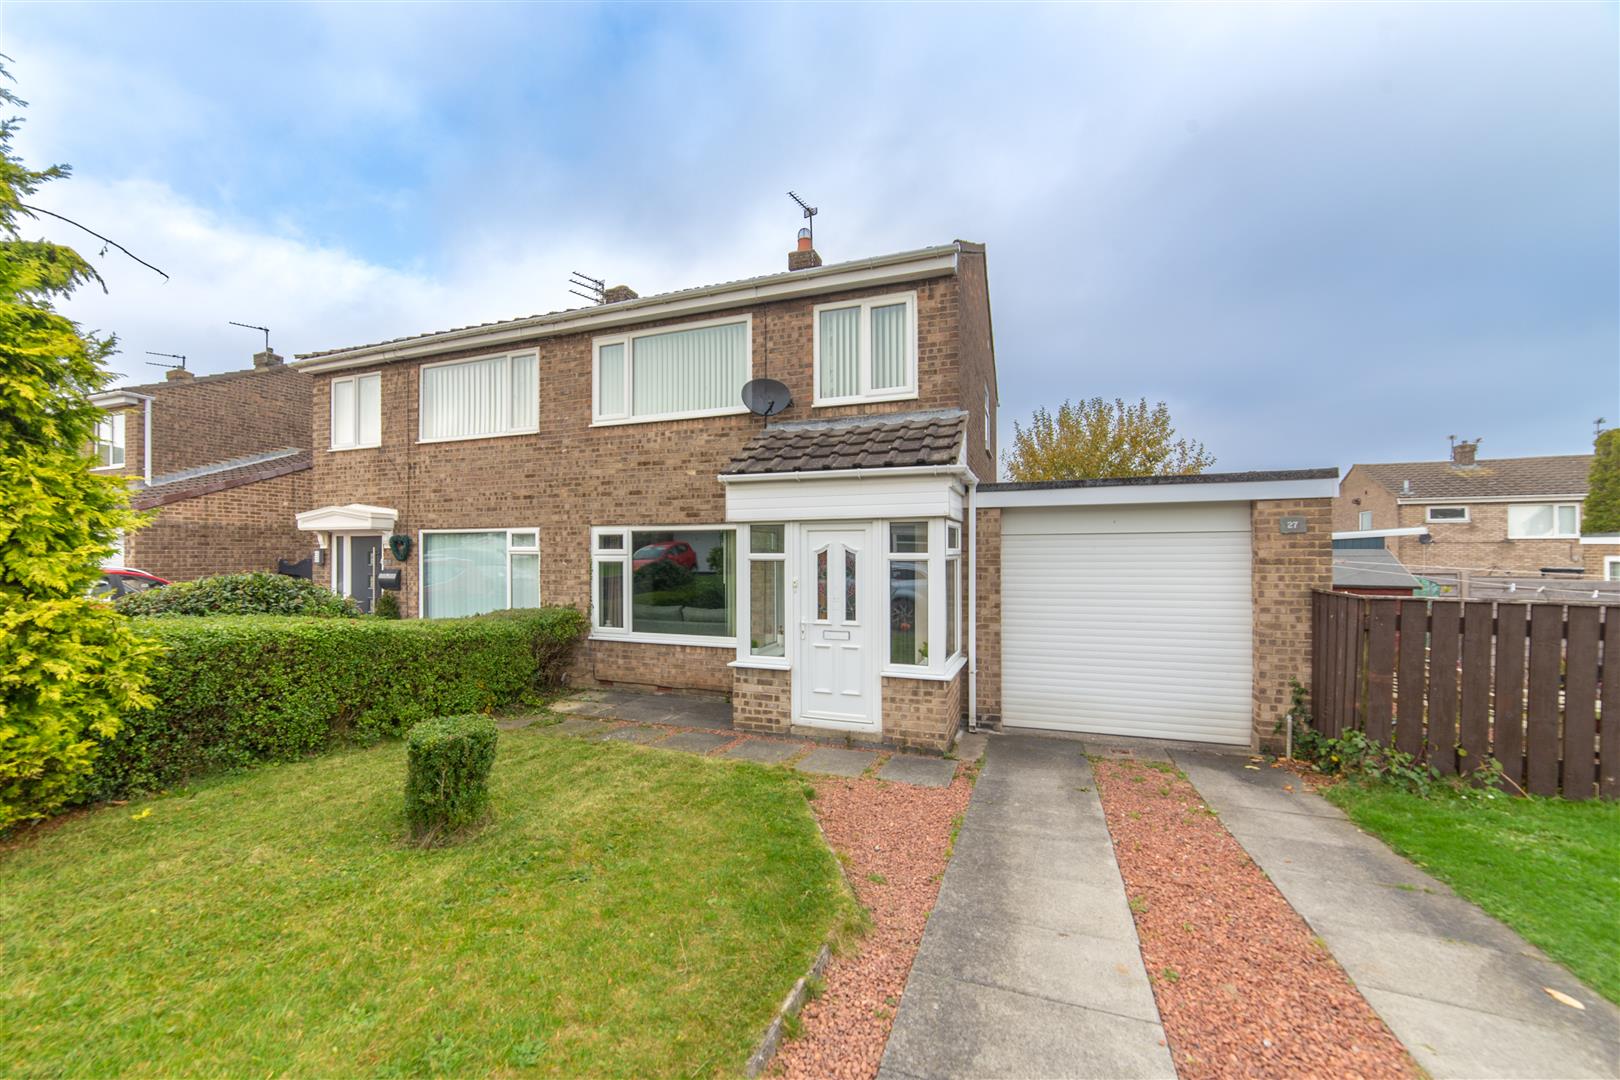 3 bed semi-detached house for sale in Chevington Close, Morpeth  - Property Image 1